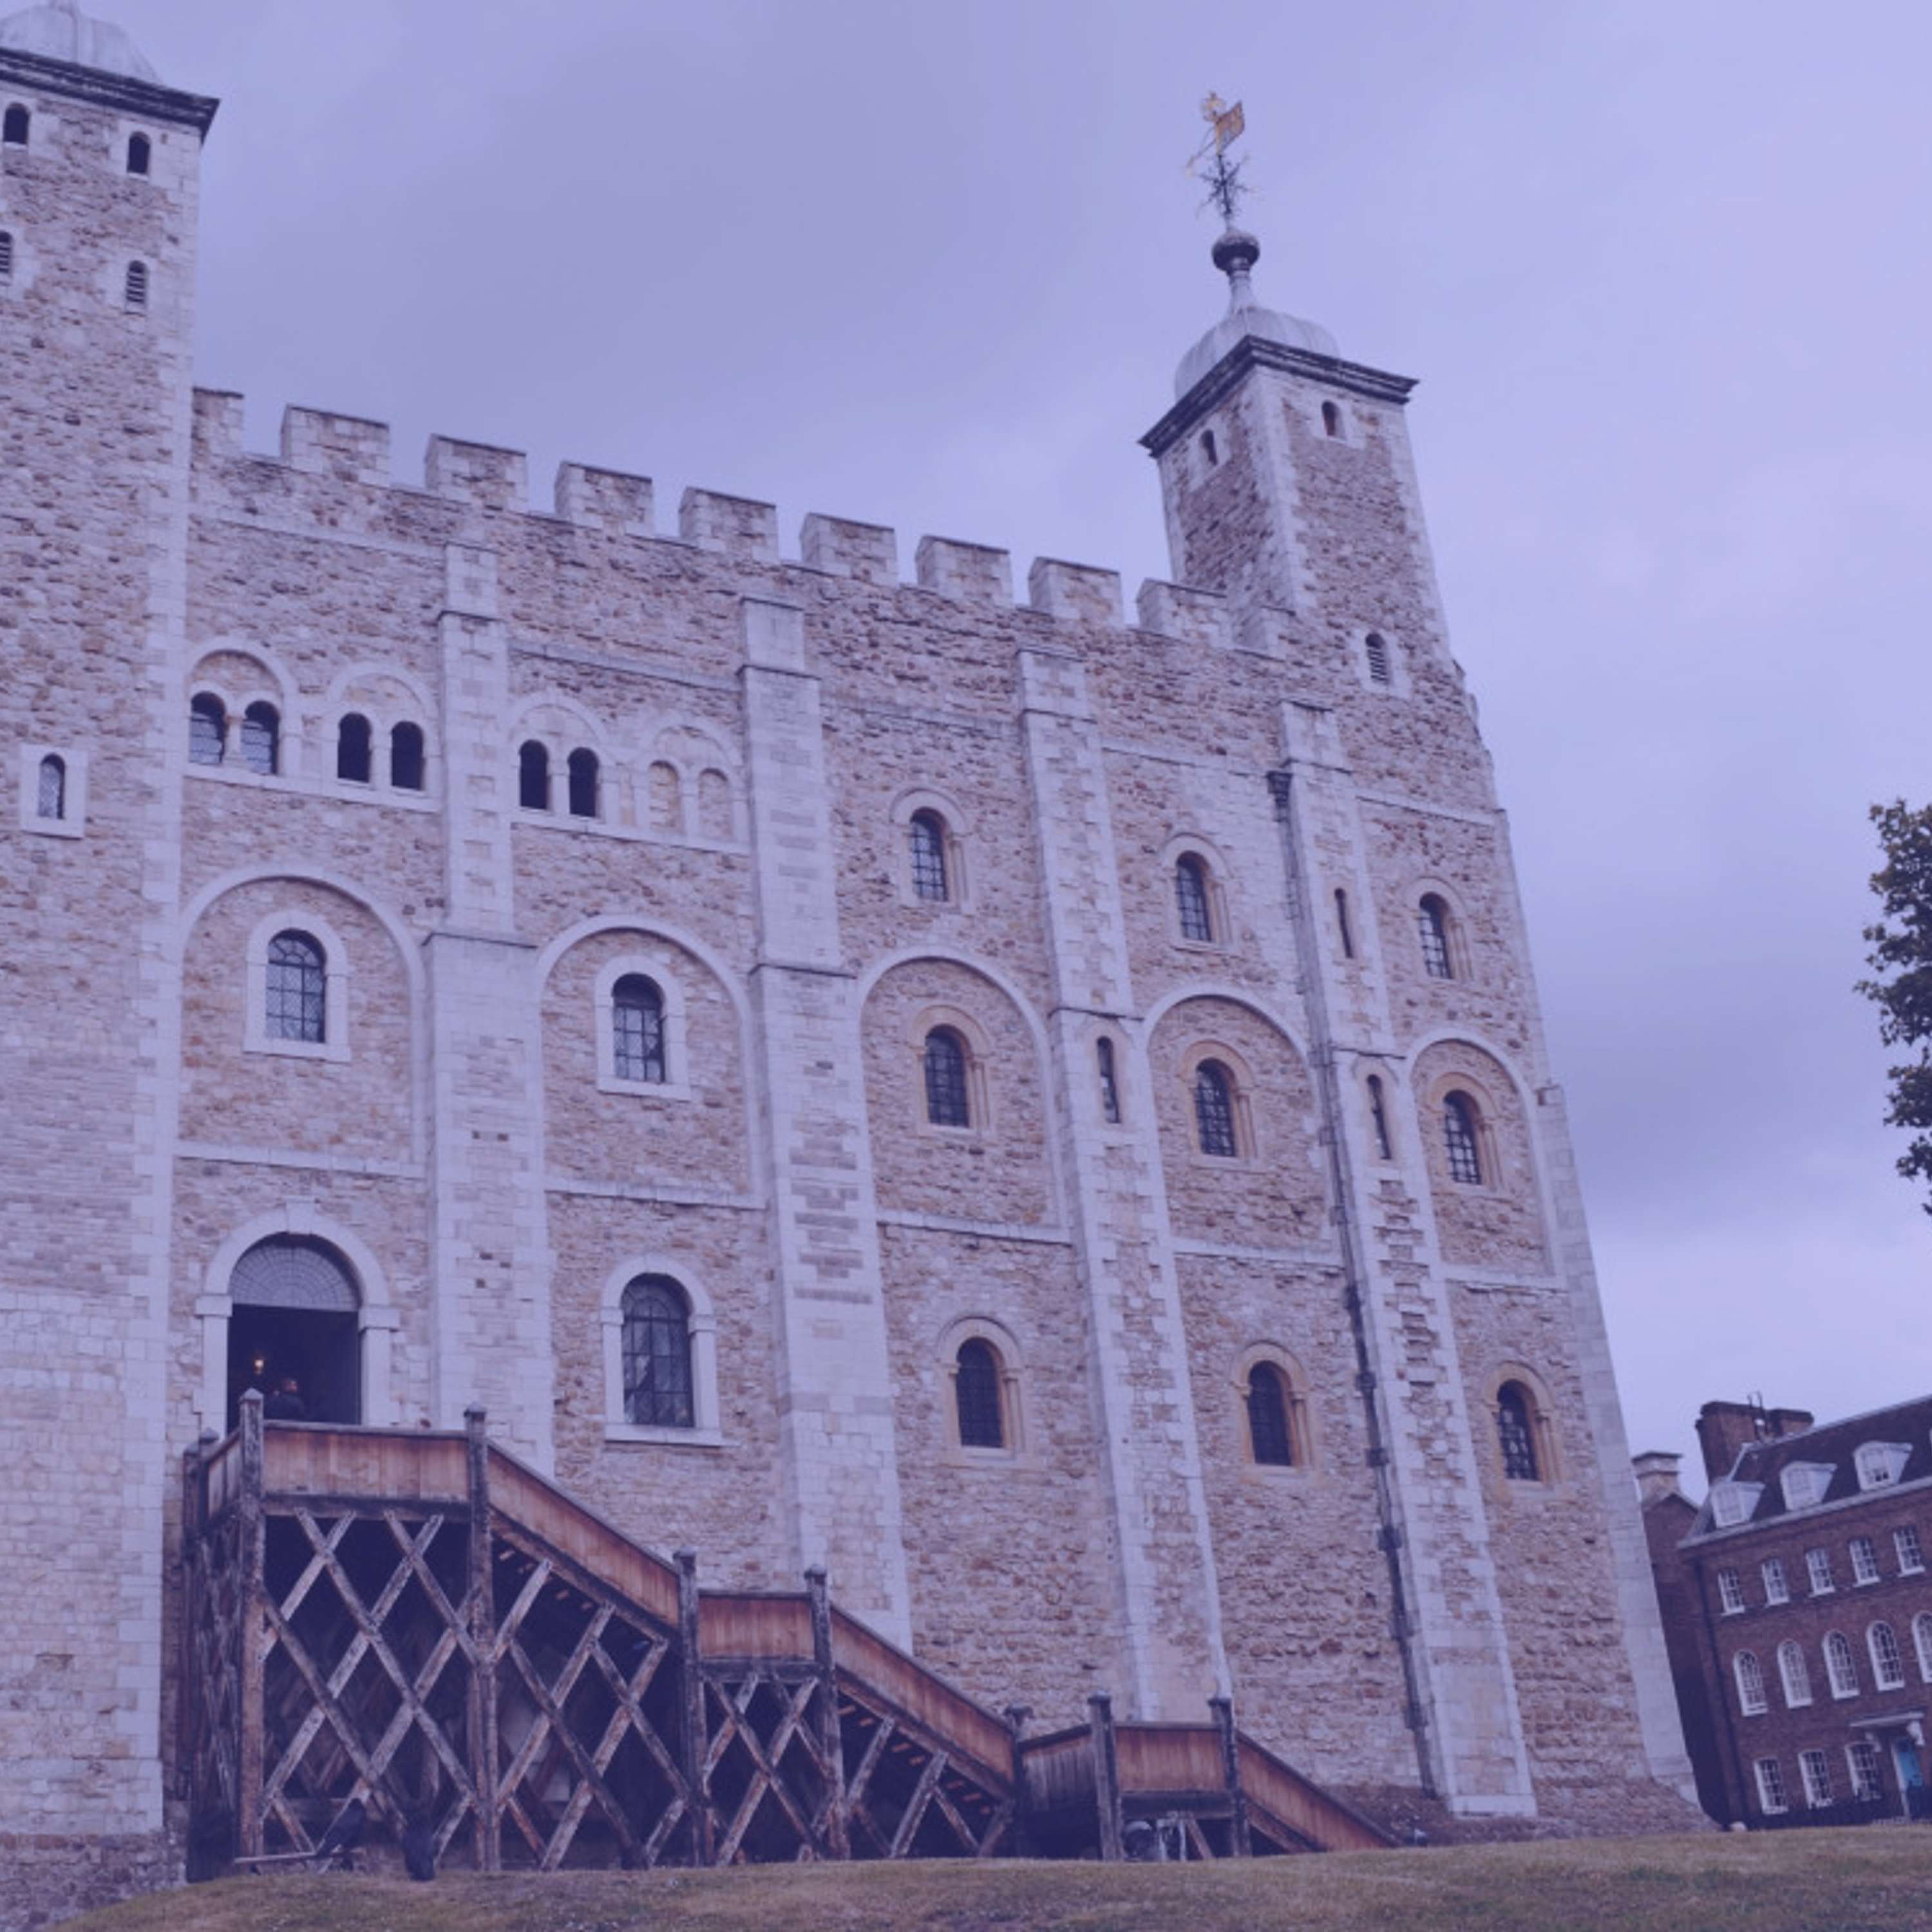 #280 | The Tower of London